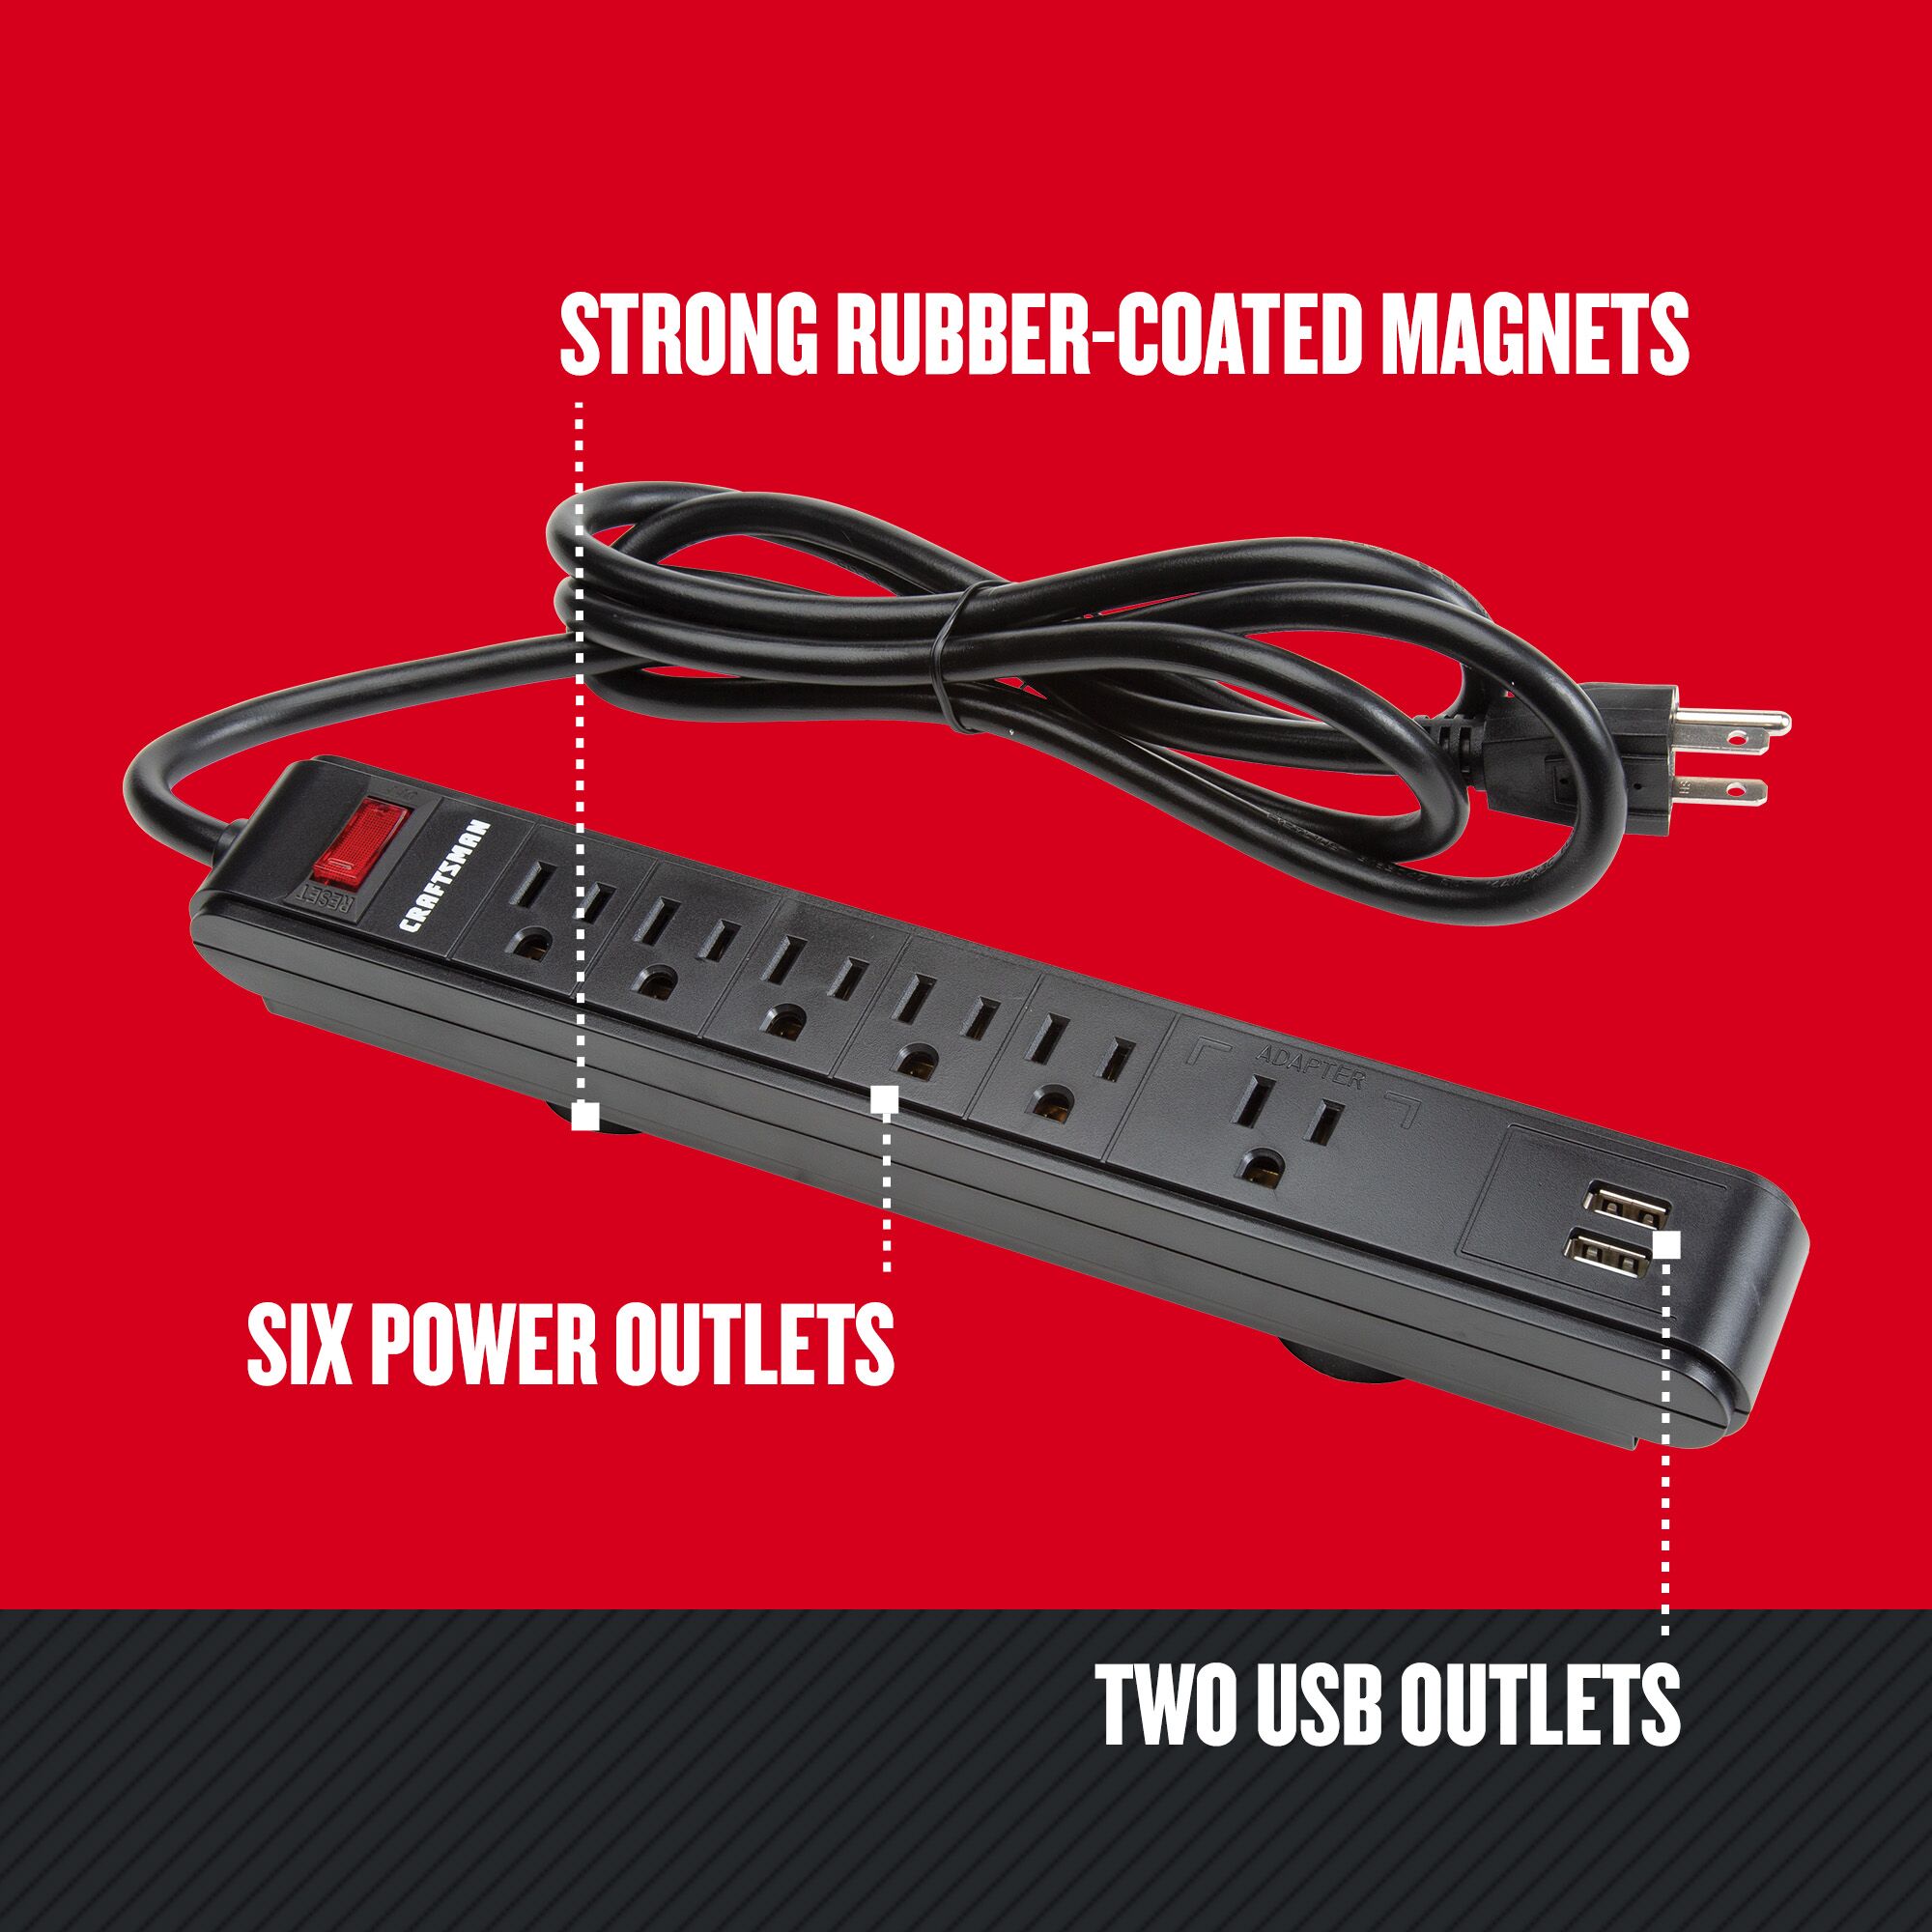 Walk-around graphic of product highlighting strong rubber-coated magnets, 2 USB outlets, 6 power outlets